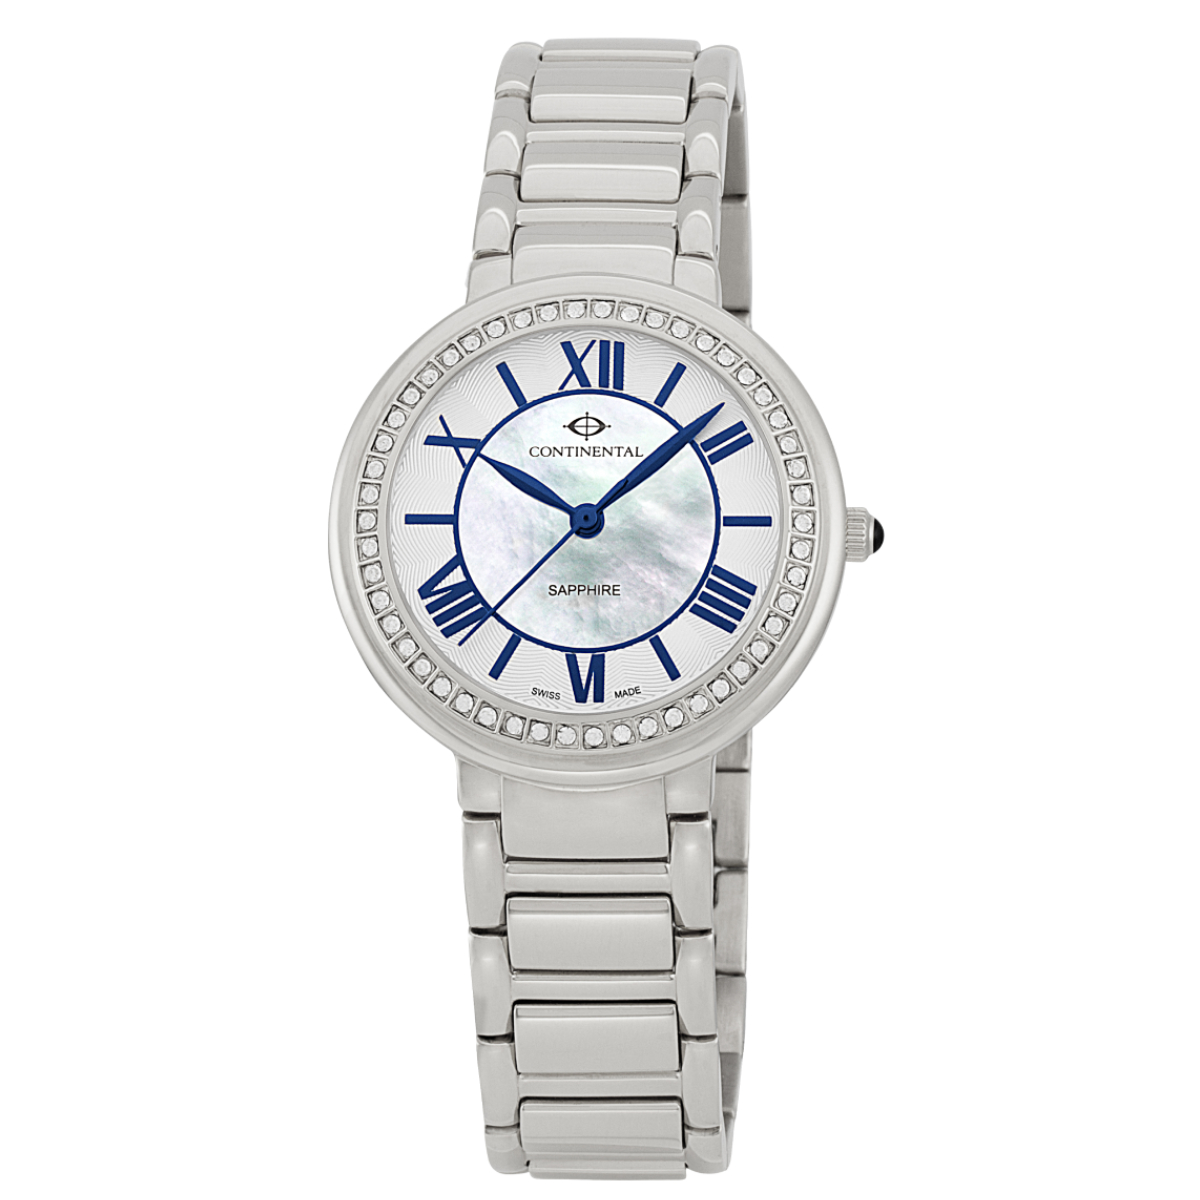 Continental Ladies Dress Watch 16103-LT101511 - front view